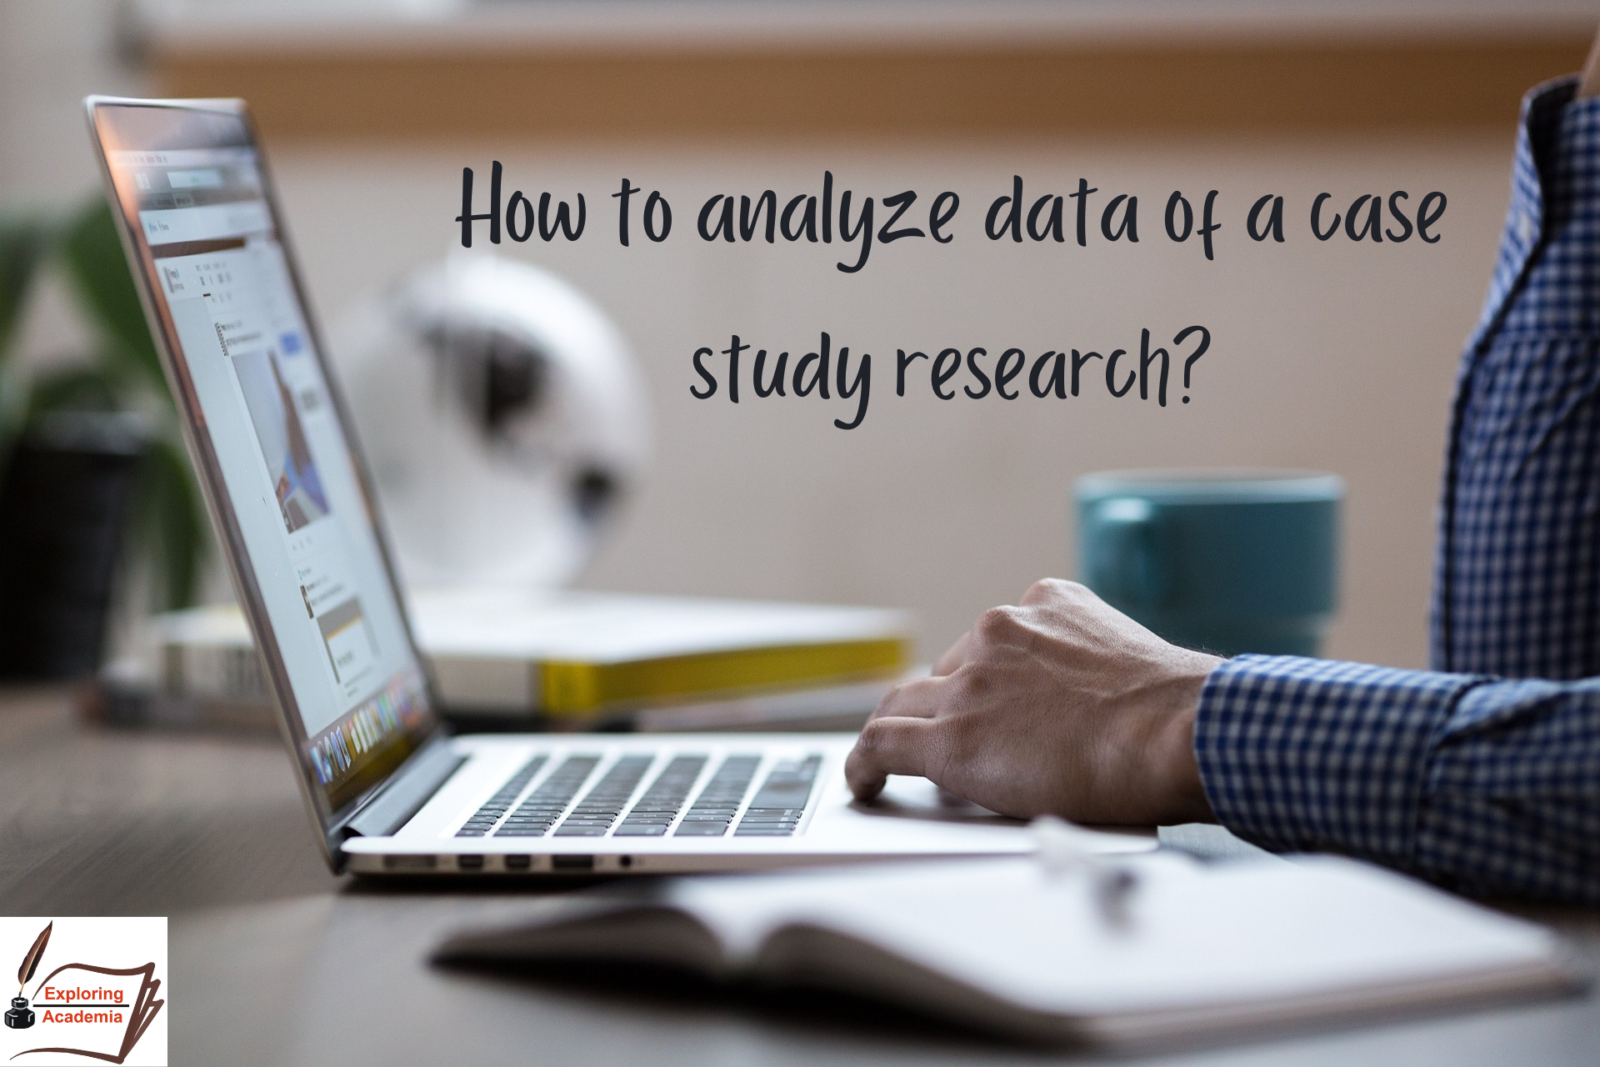 How to analyze data of a case study research